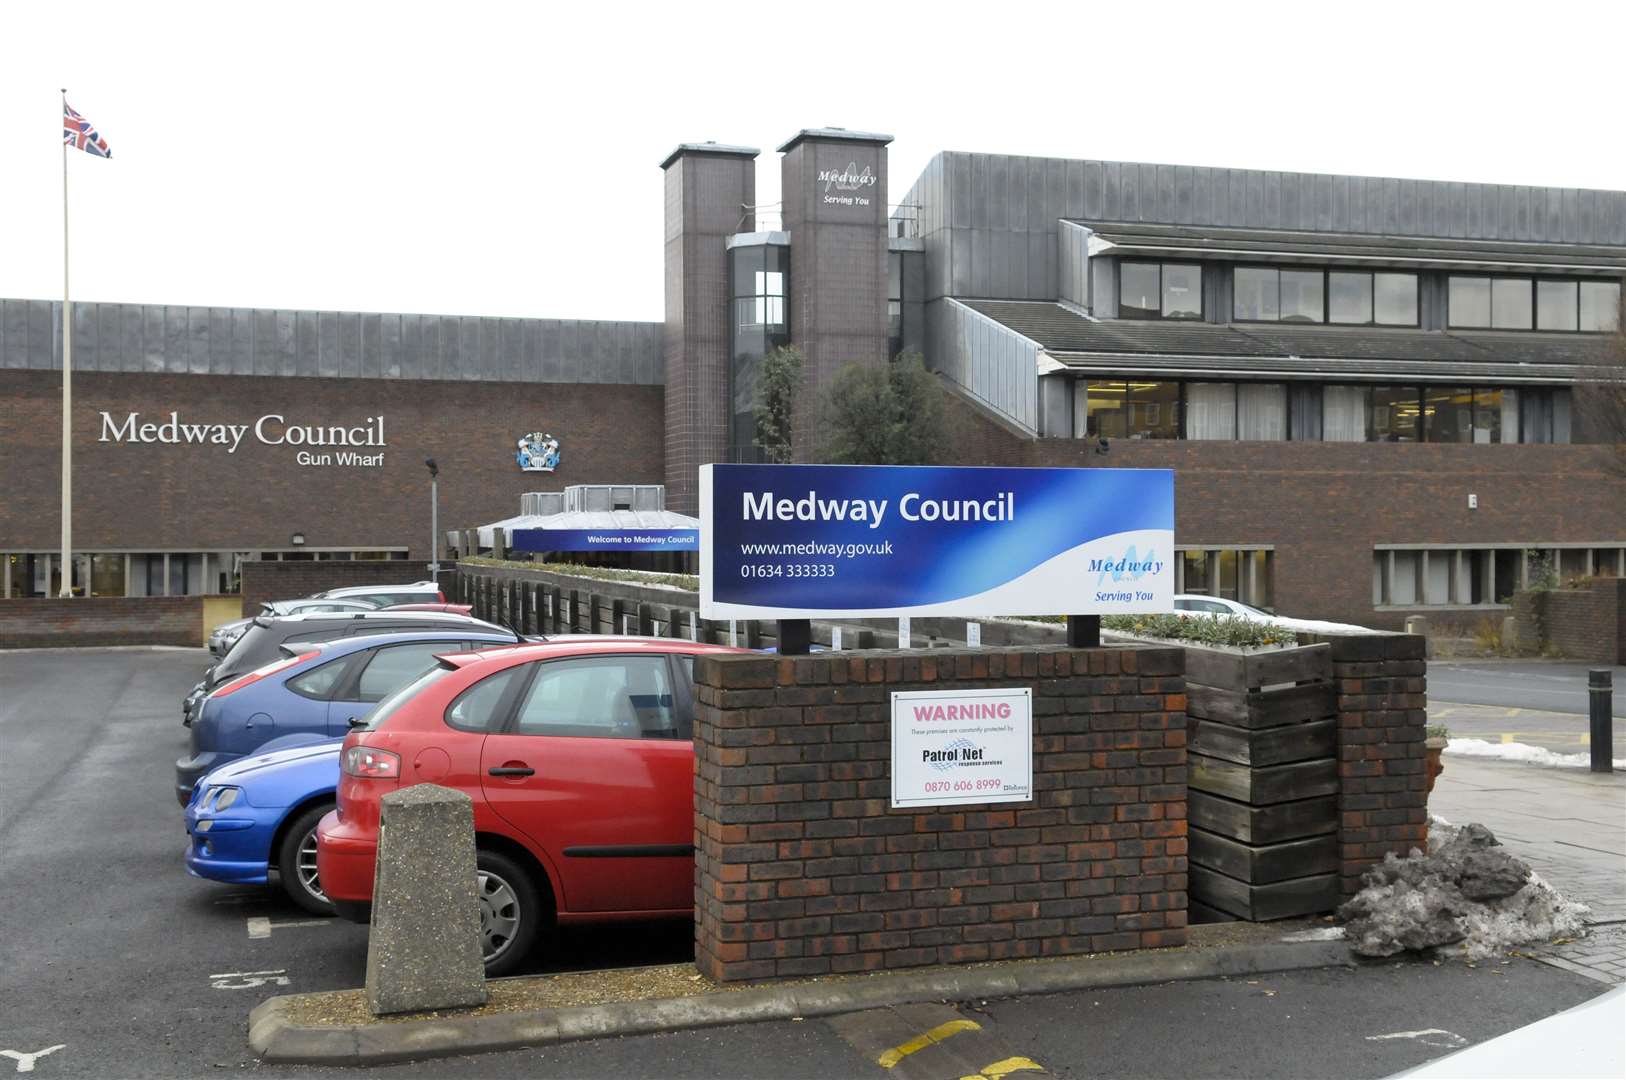 Medway Council is taking enforcement action to remove the travellers